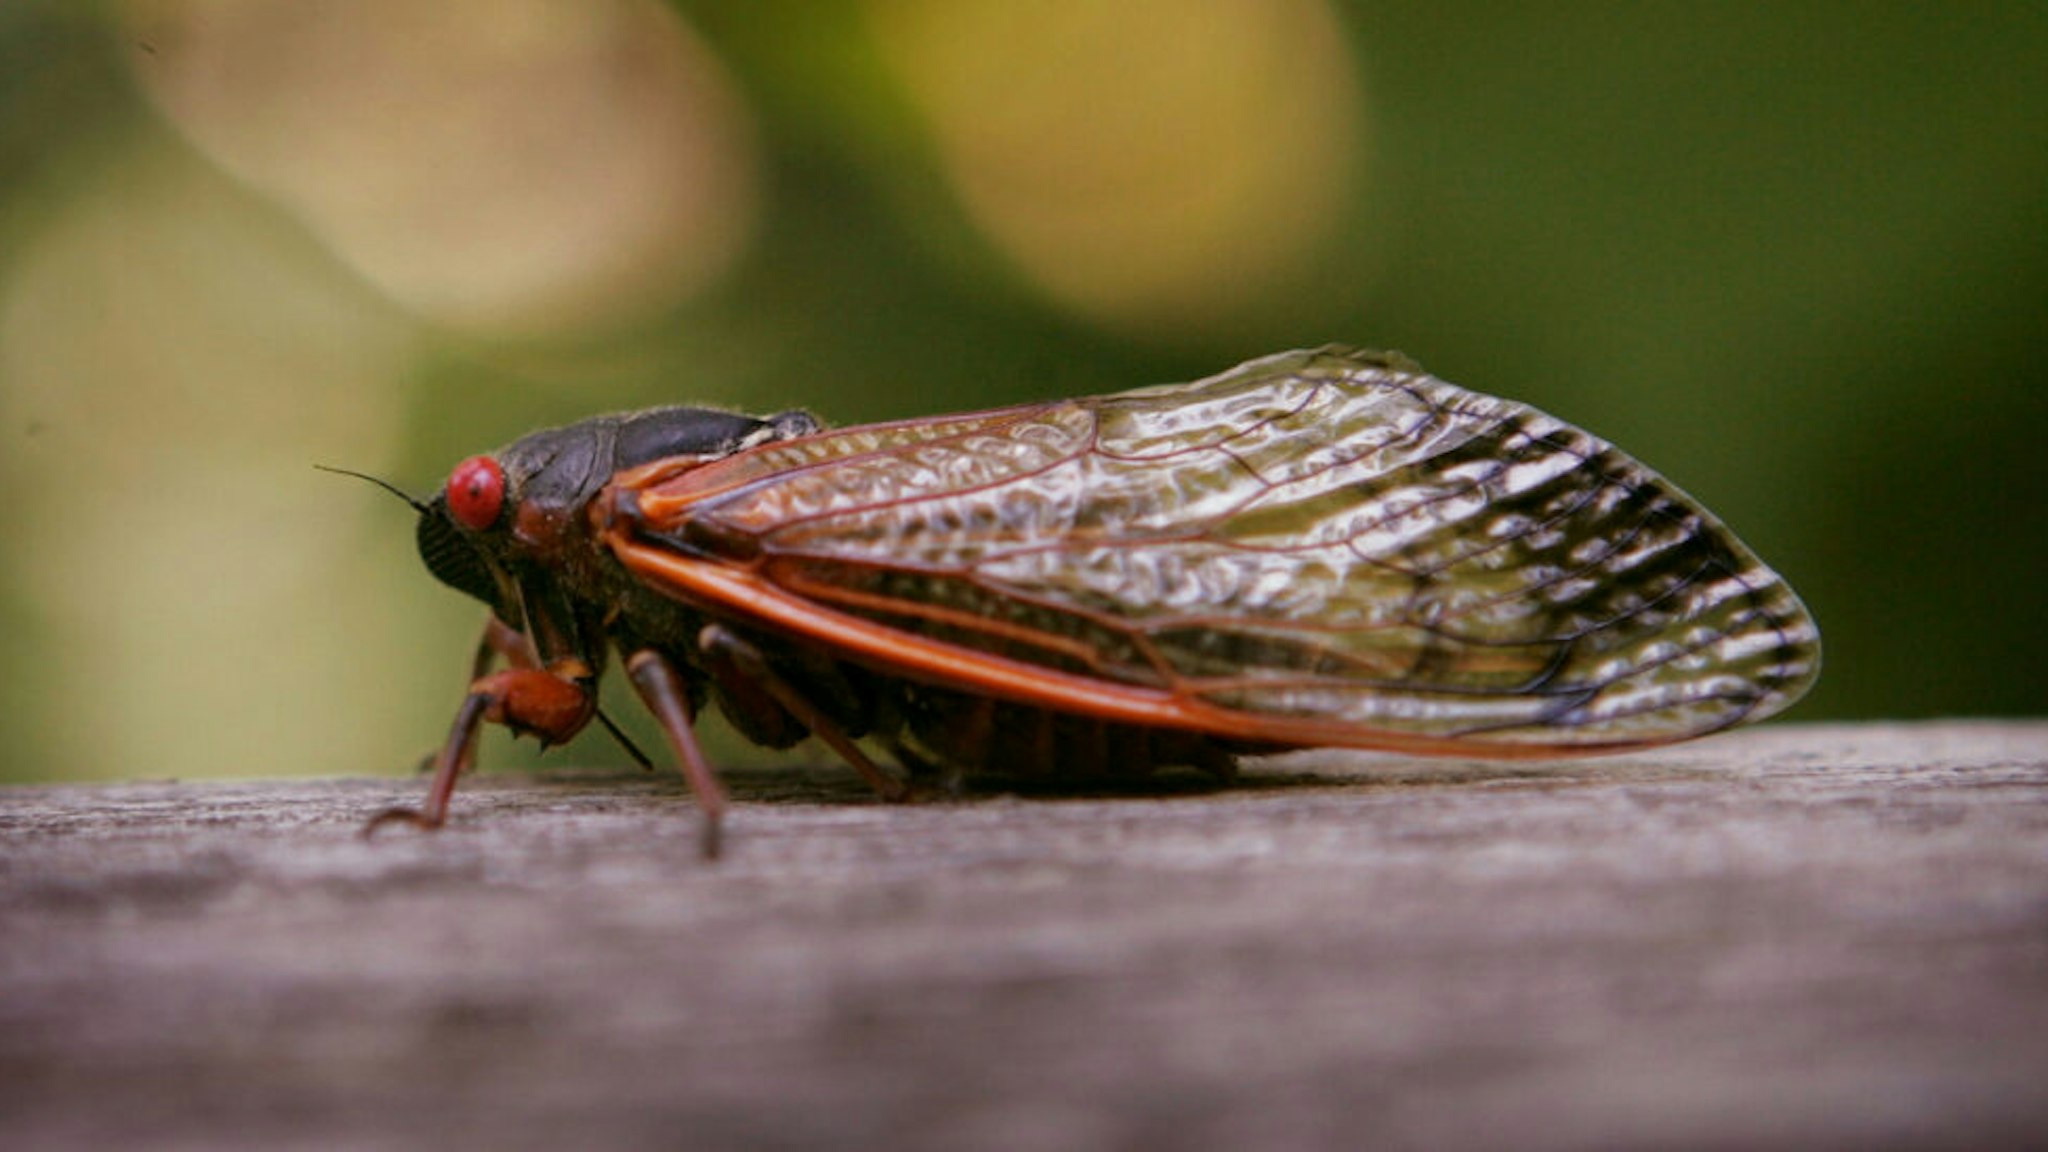 WILLOW SPRINGS, IL - JUNE 11: A cicada sits on a fence at a forest preserve June 11, 2007 in Willow Springs, Illinois. The periodical cicadas are among the millions in the area that have emerged from the ground and taken to the trees during the past couple of weeks as part of their 17-year hatch cycle.